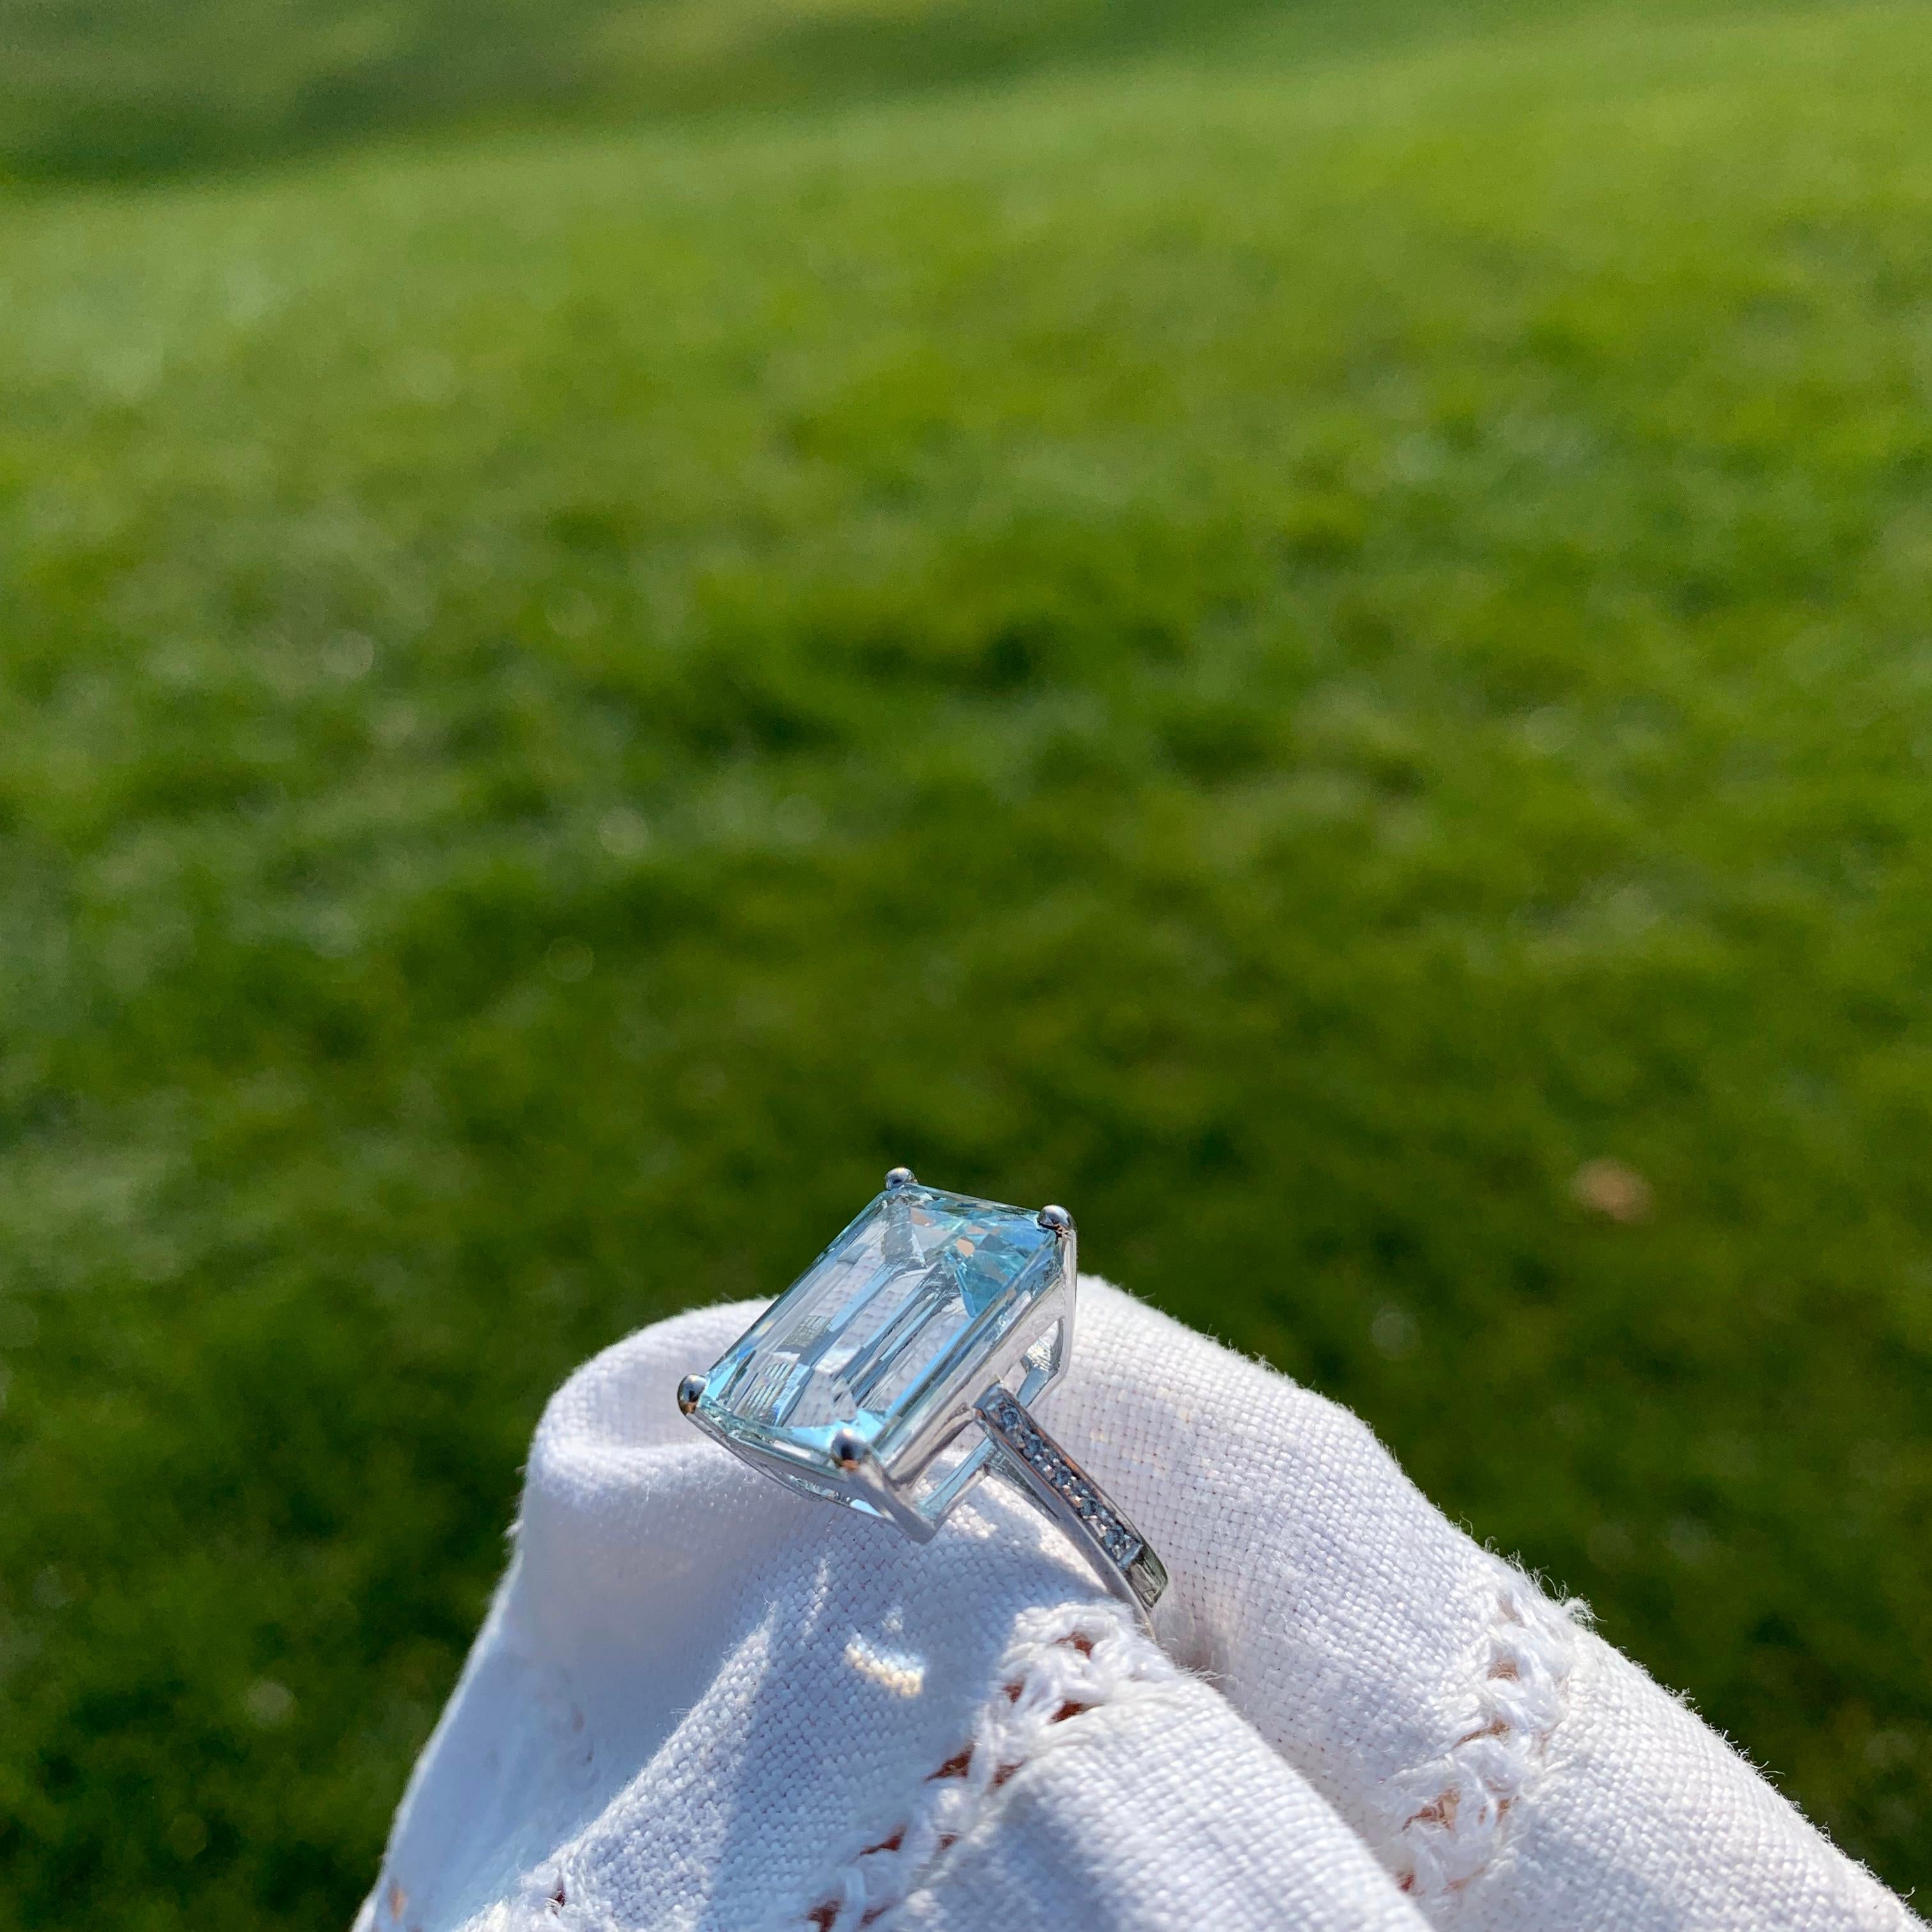 -Handmade in our 150 year old workshop South of Rome, Italy
-8.20ct Handcut AAA Aquamarine 
- Cut in Italy by a third generation stone cutter- excellent symmetry and cut
- 13.70x 10.31 x 7.51mm 
-This made to order for your size but approximately